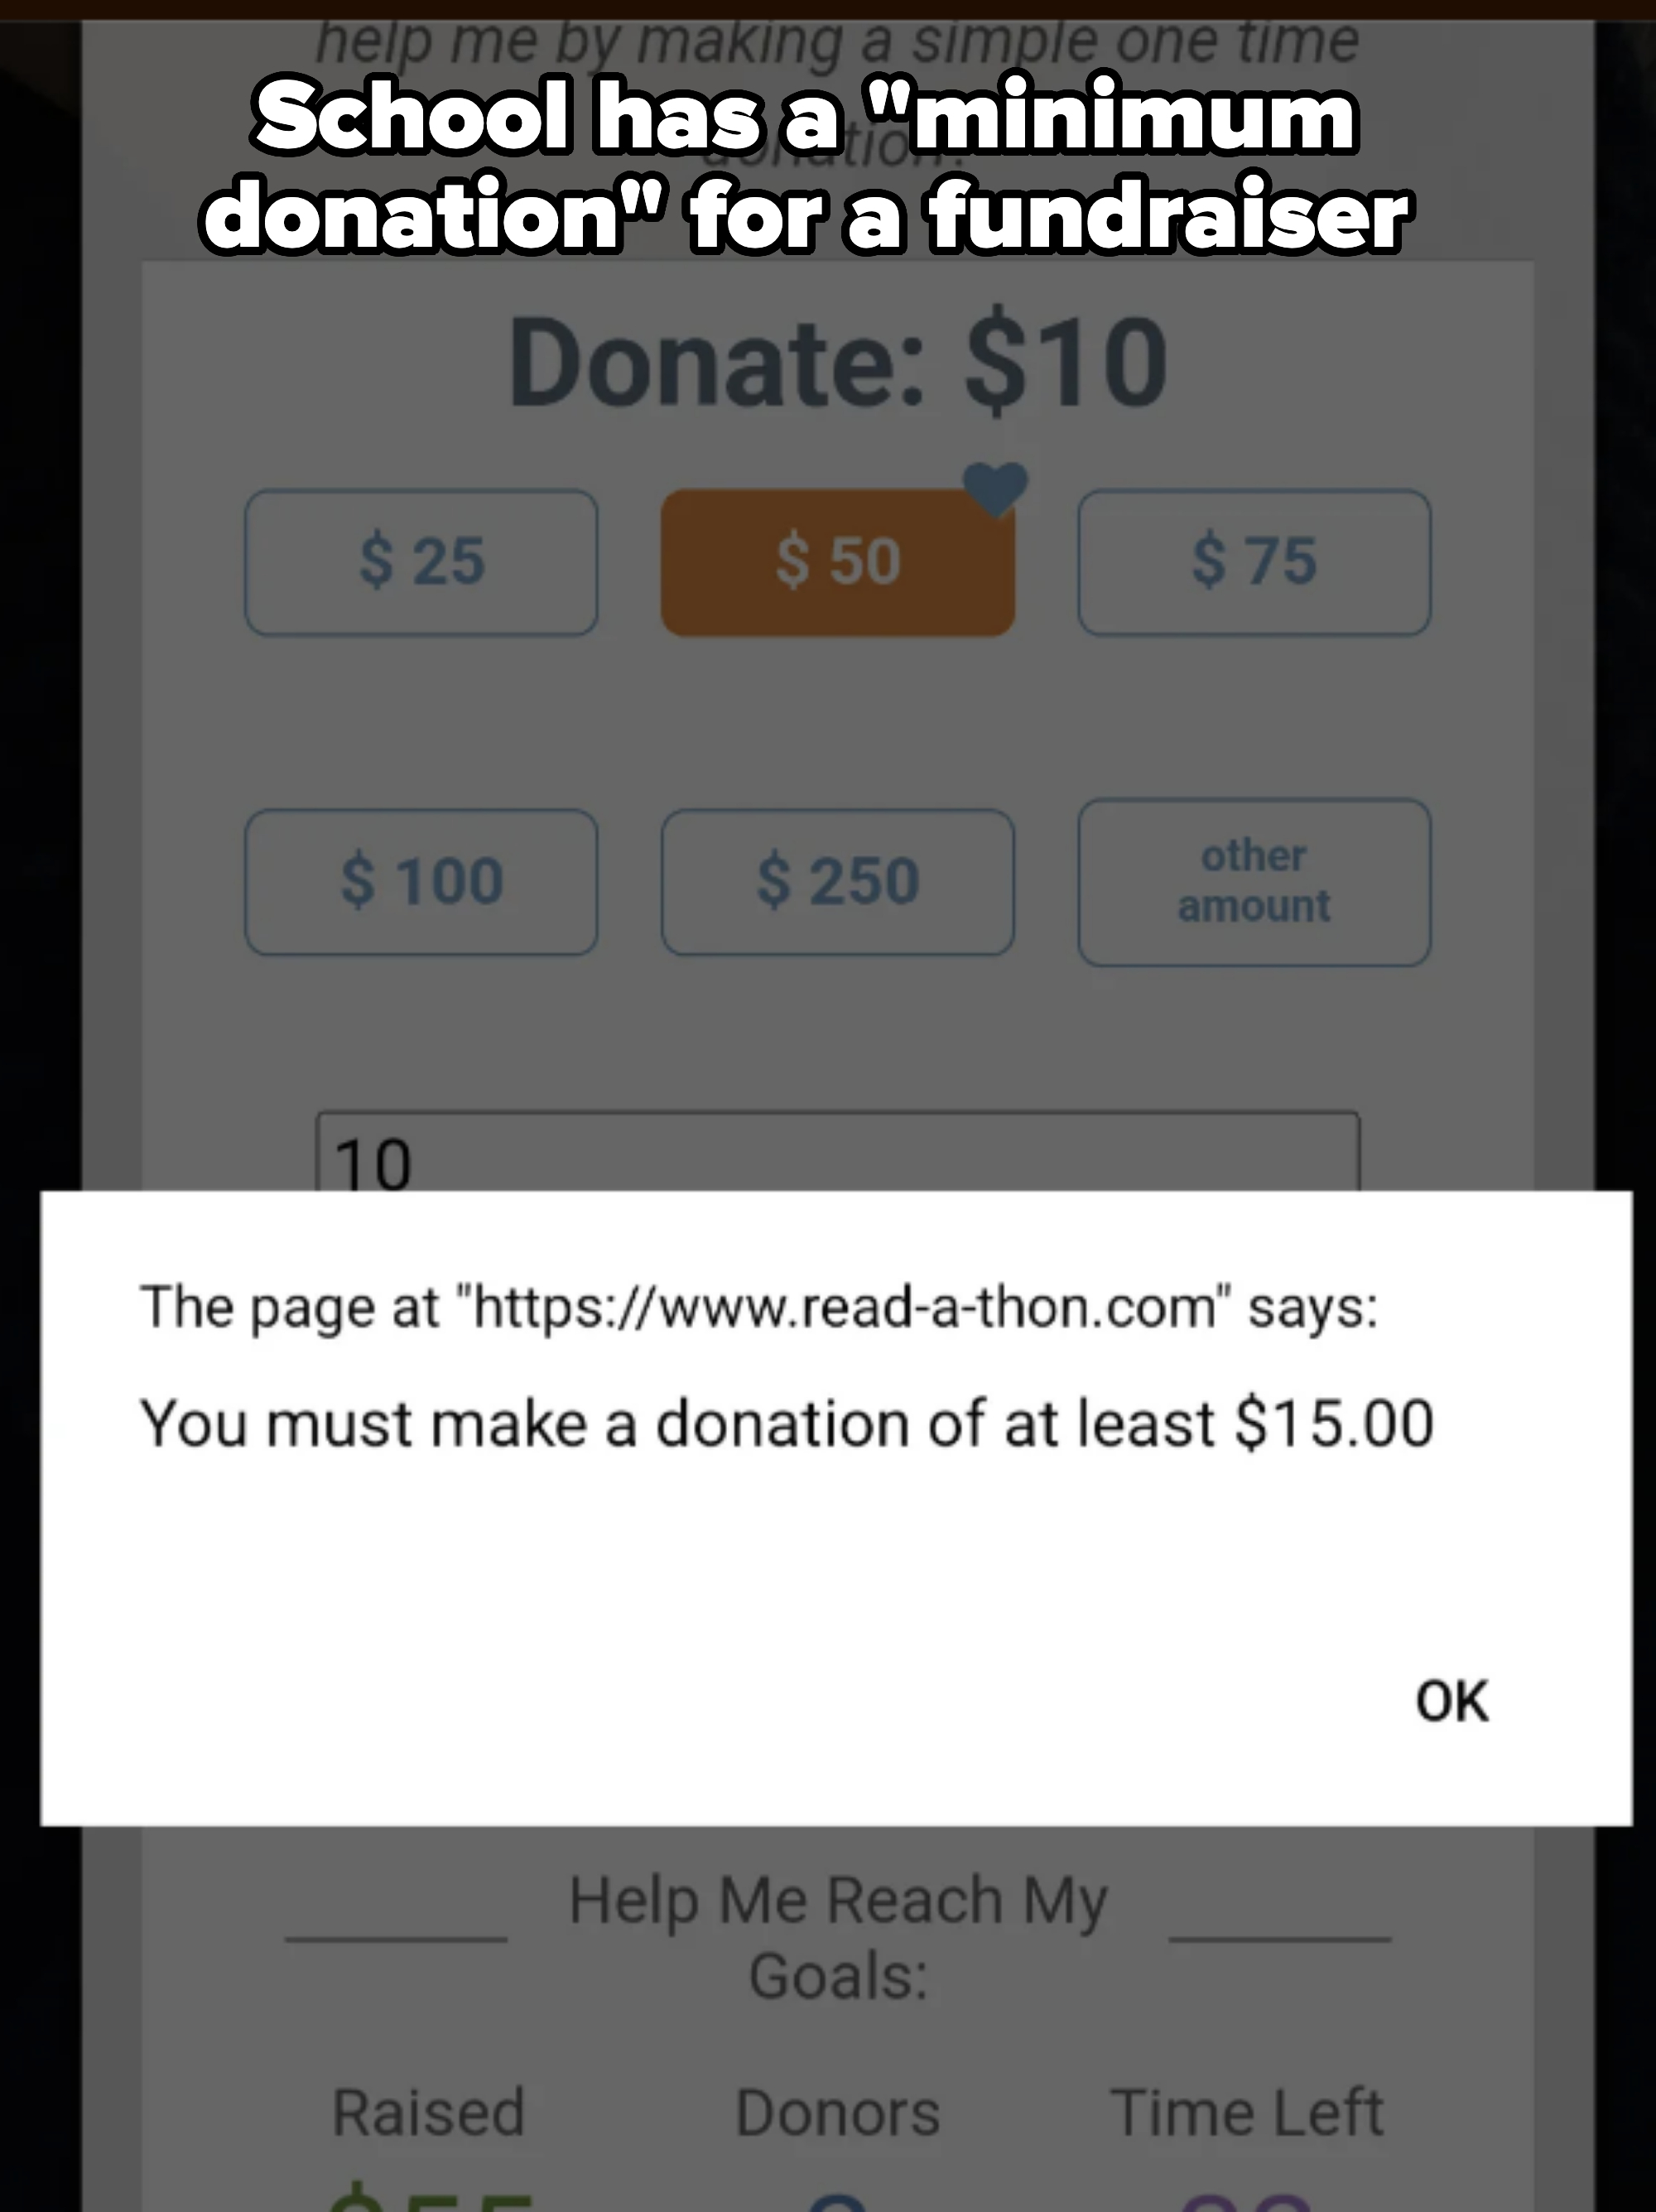 The page requires a minimum donation of $15.00 for the &quot;Read-a-thon&quot; donation, despite the options provided for $10 and higher. There is an OK button to close the message